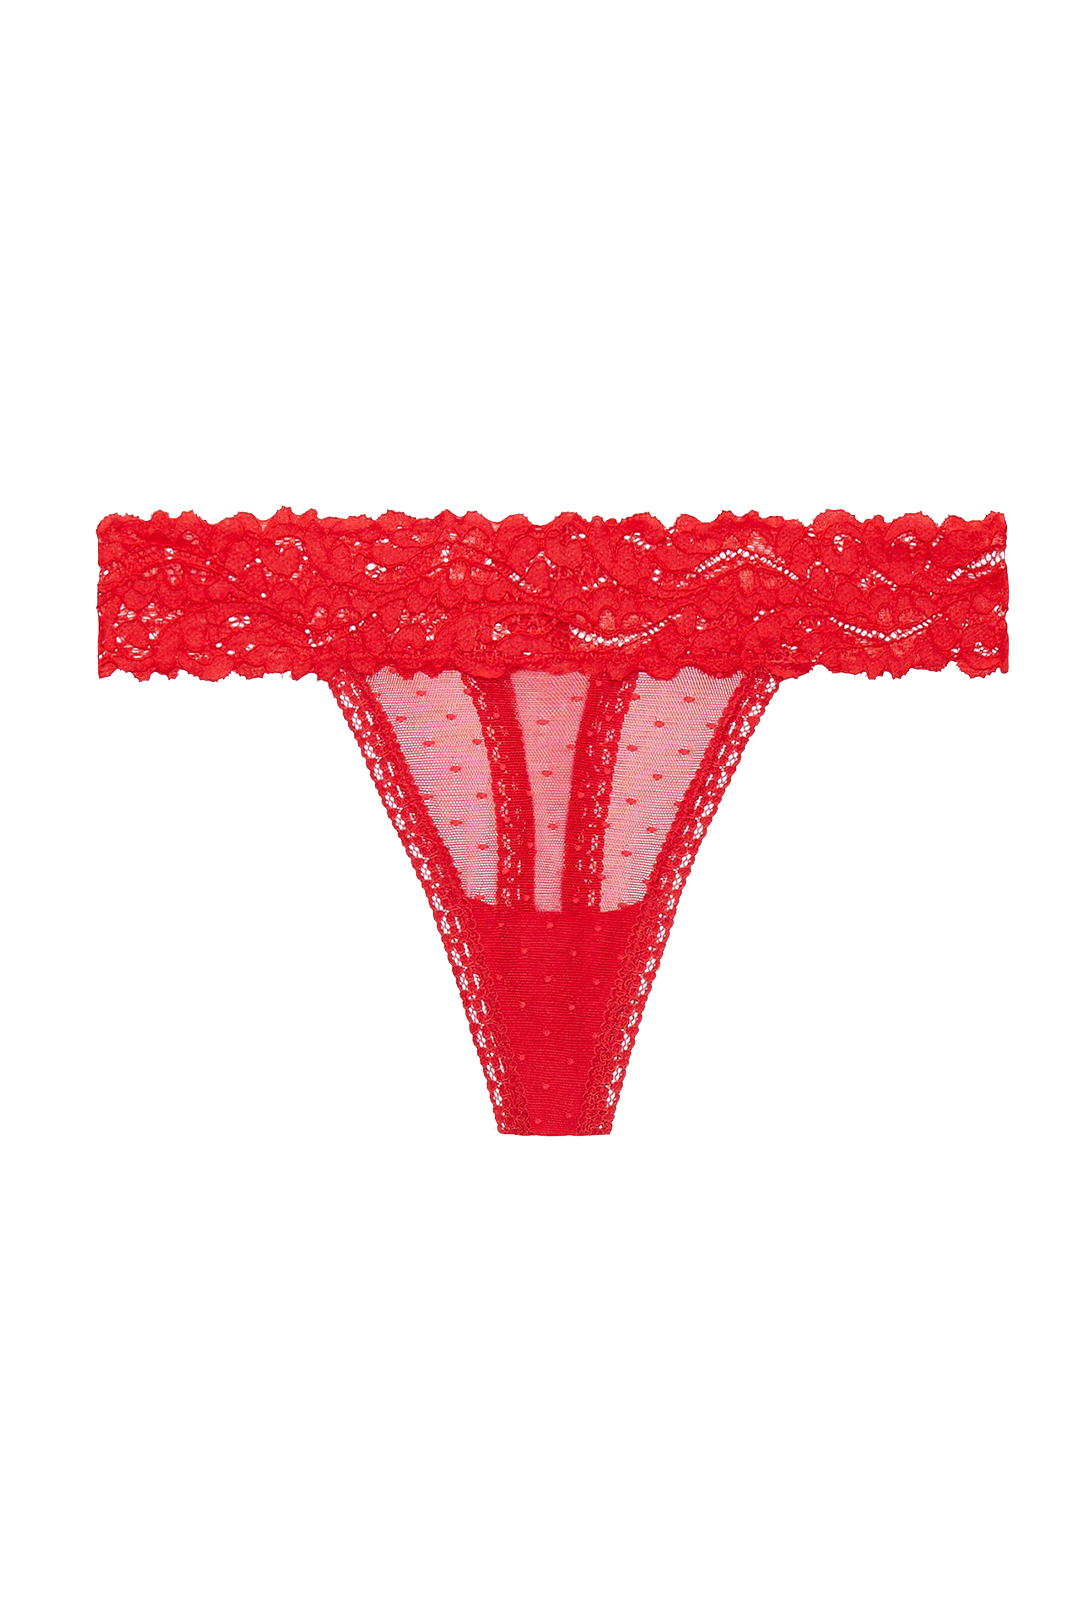 Stretch Lace Dotted Mesh Thong in Goji Berry Red